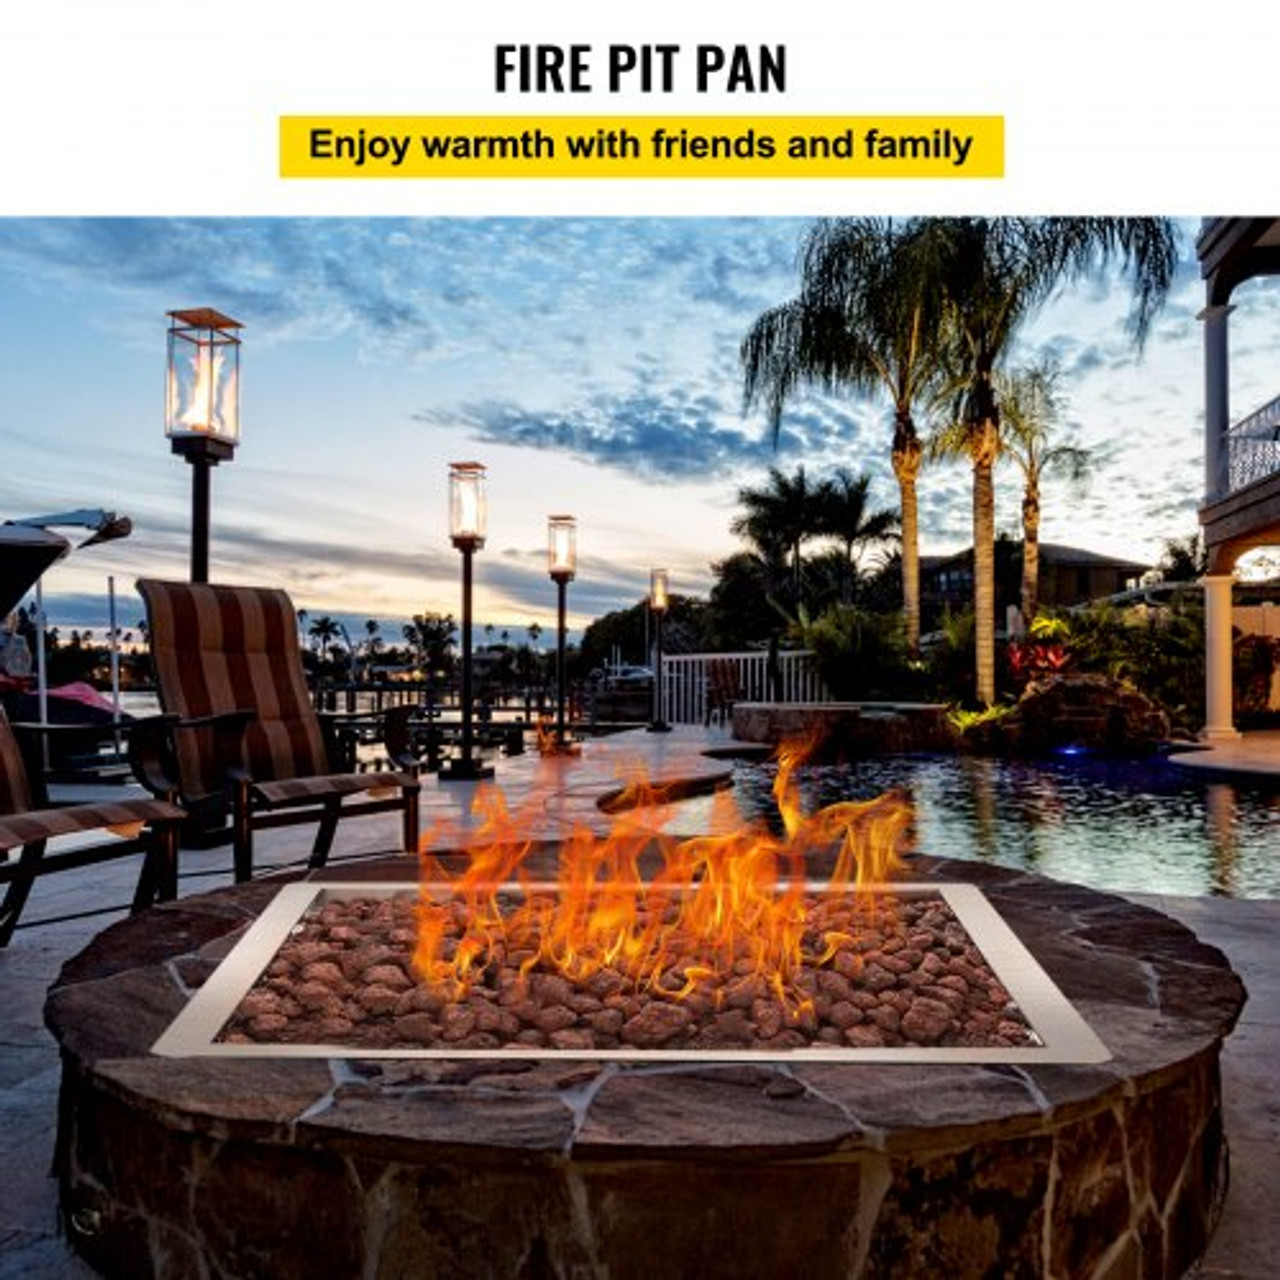 Drop in Fire Pit Pan, 18" x 18" Square Fire Pit Burner, Stainless Steel Gas Fire Pan, Fire Pit Burner Pan w/ 1 Pack Volcanic Rock Fire Pit Insert w/ 90K BTU for Keeping Warm w/ Family & Friends